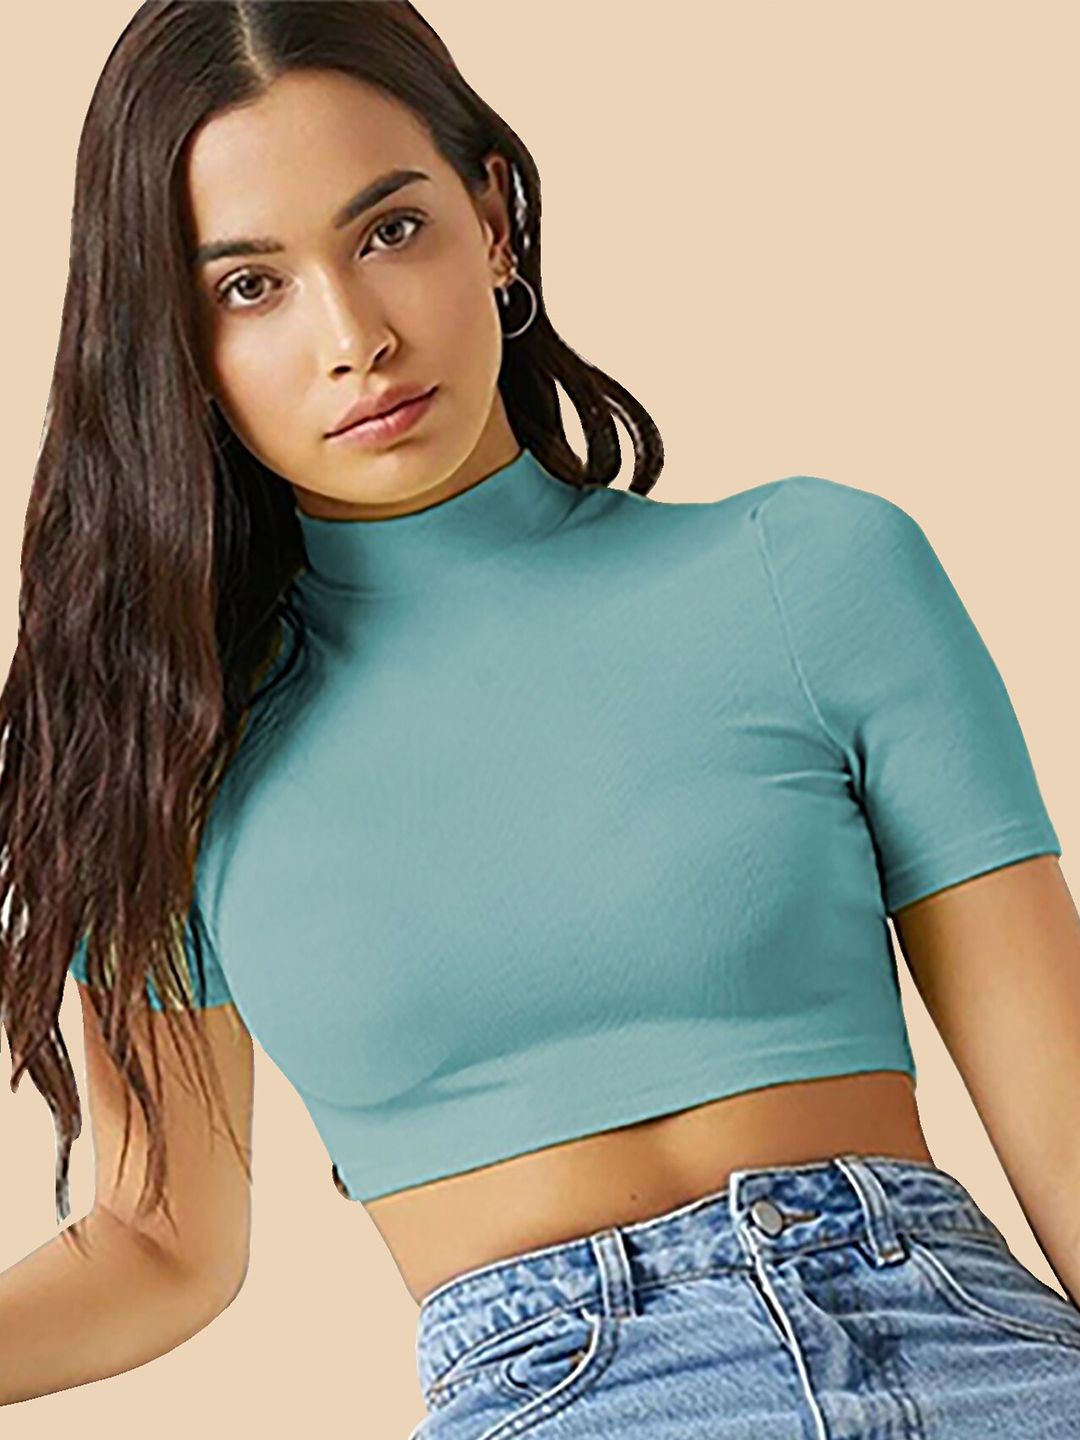 Dream Beauty Fashion Crop Top Price in India